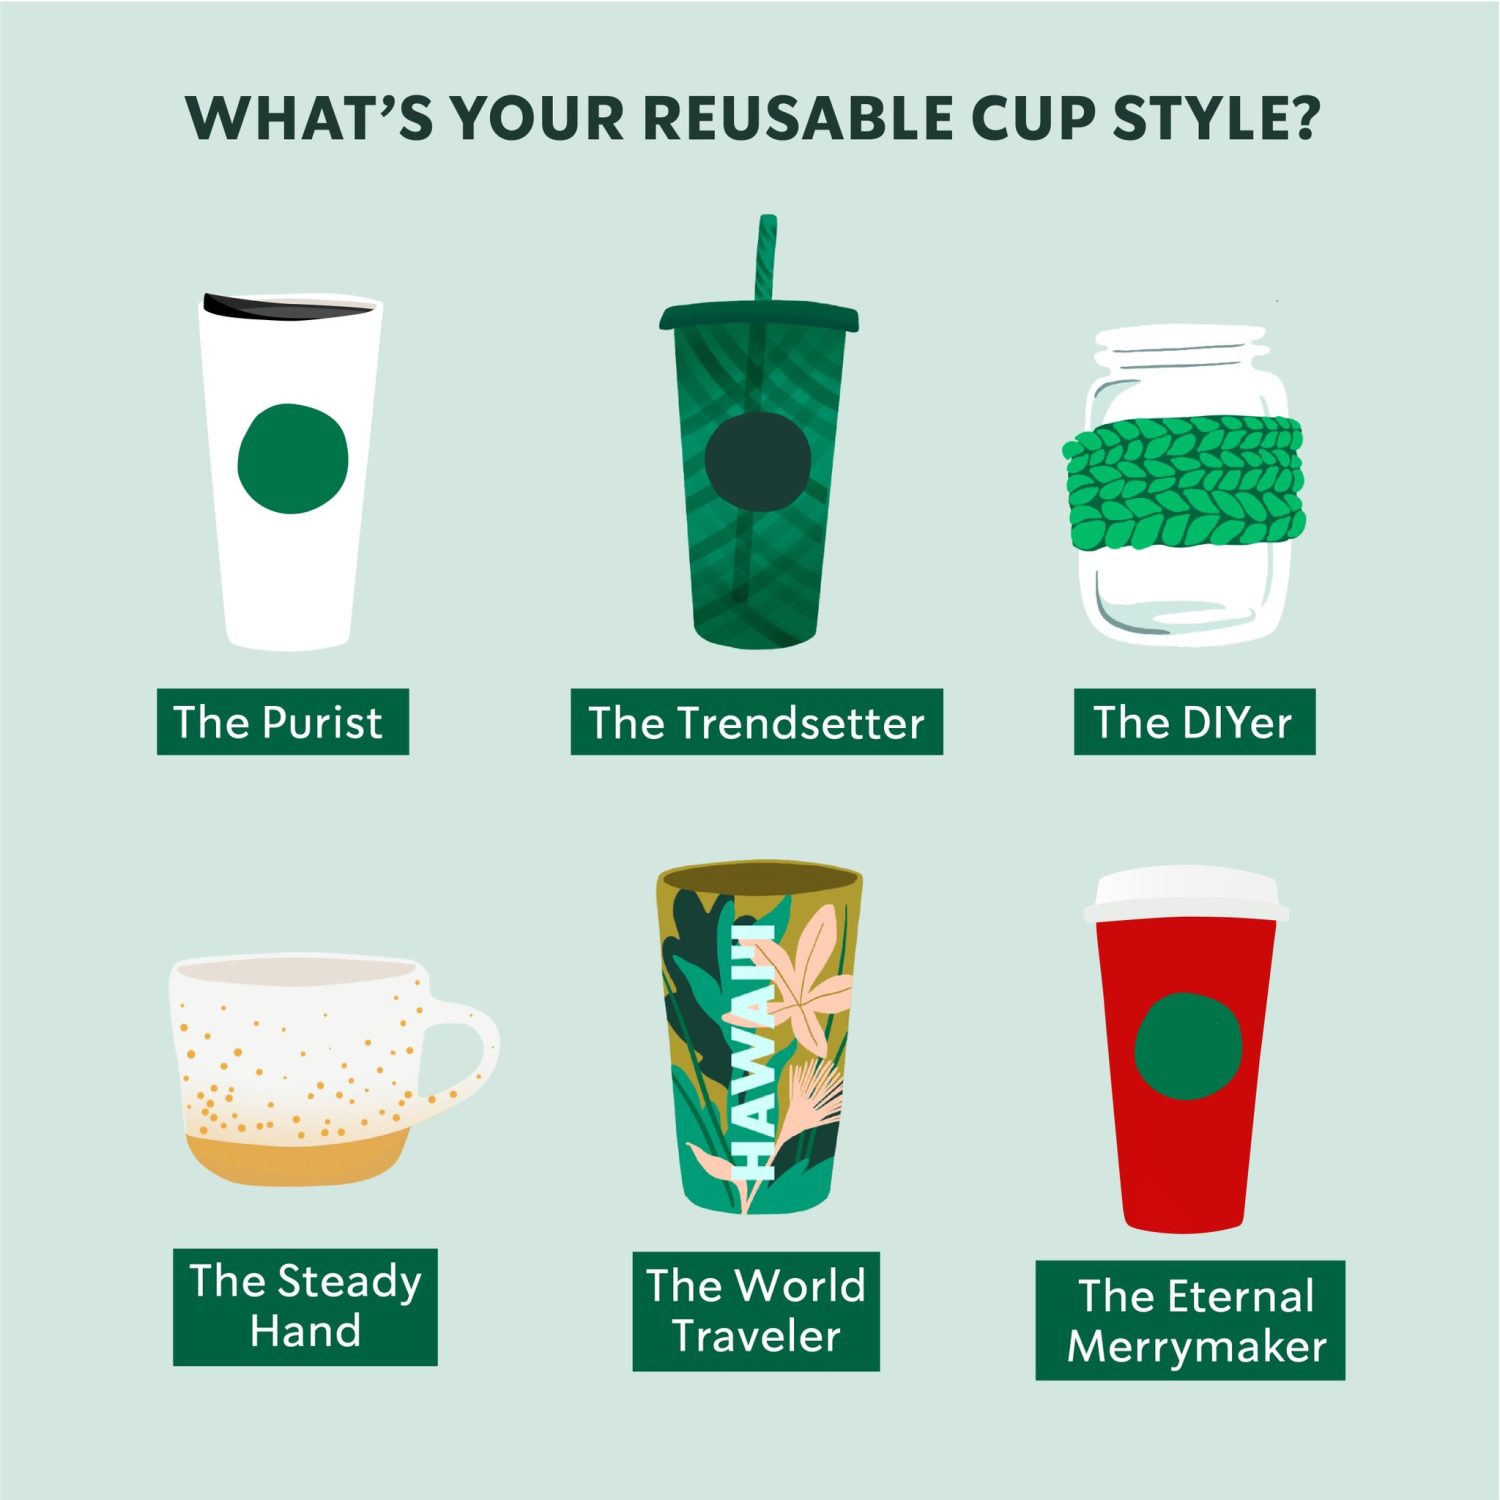 Why You're Still Not Using that Reusable Coffee Mug